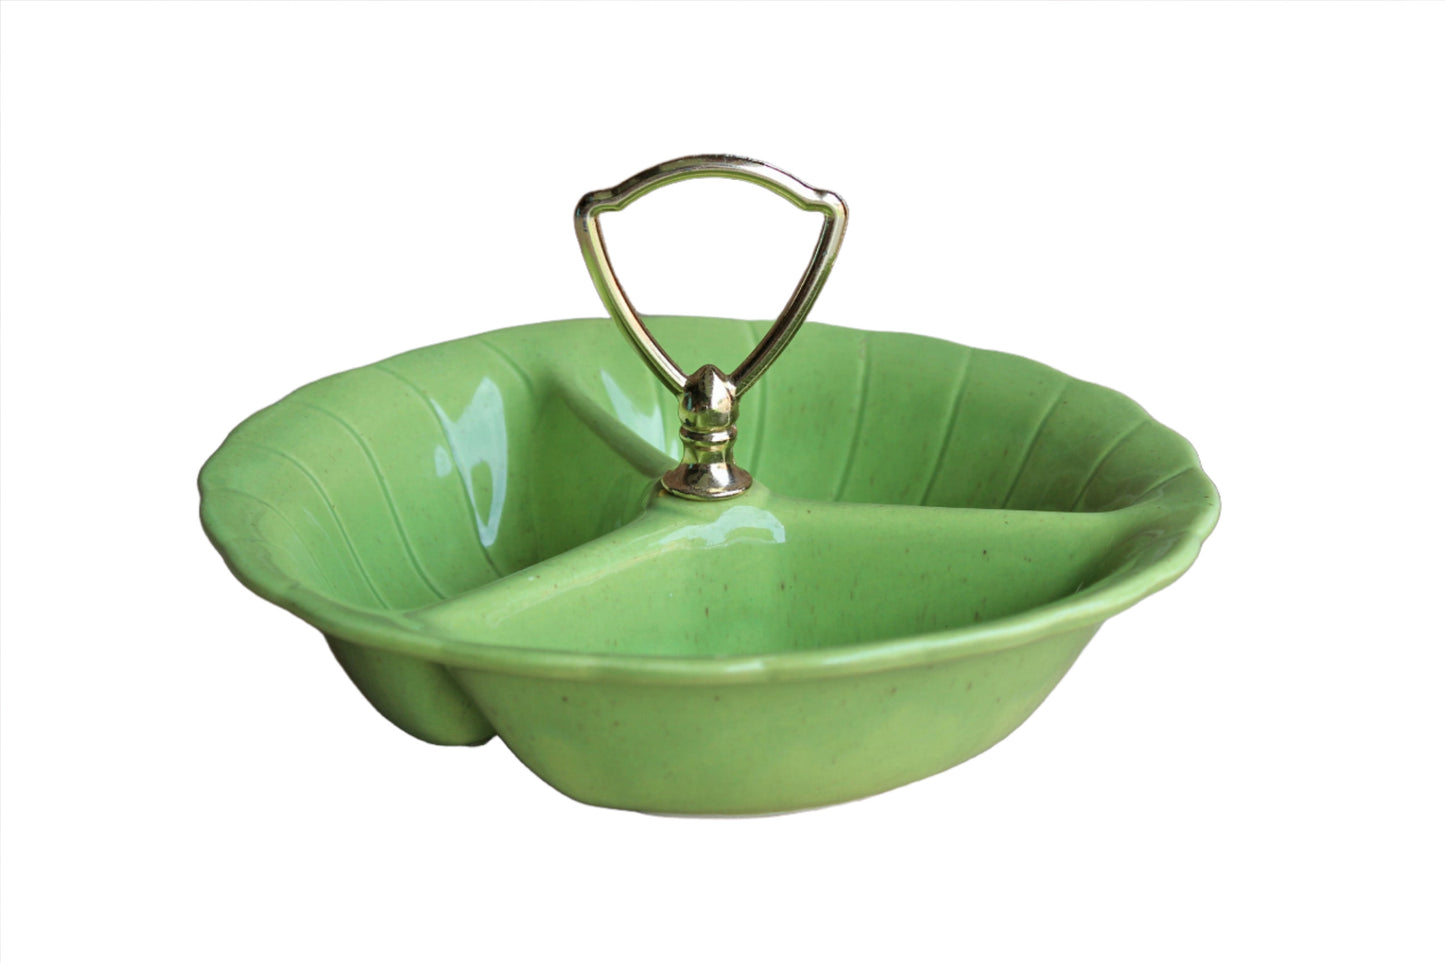 Lane & Company (Van Nuys, California, USA) Celadon Green Divided Candy or Snack Serving Dish